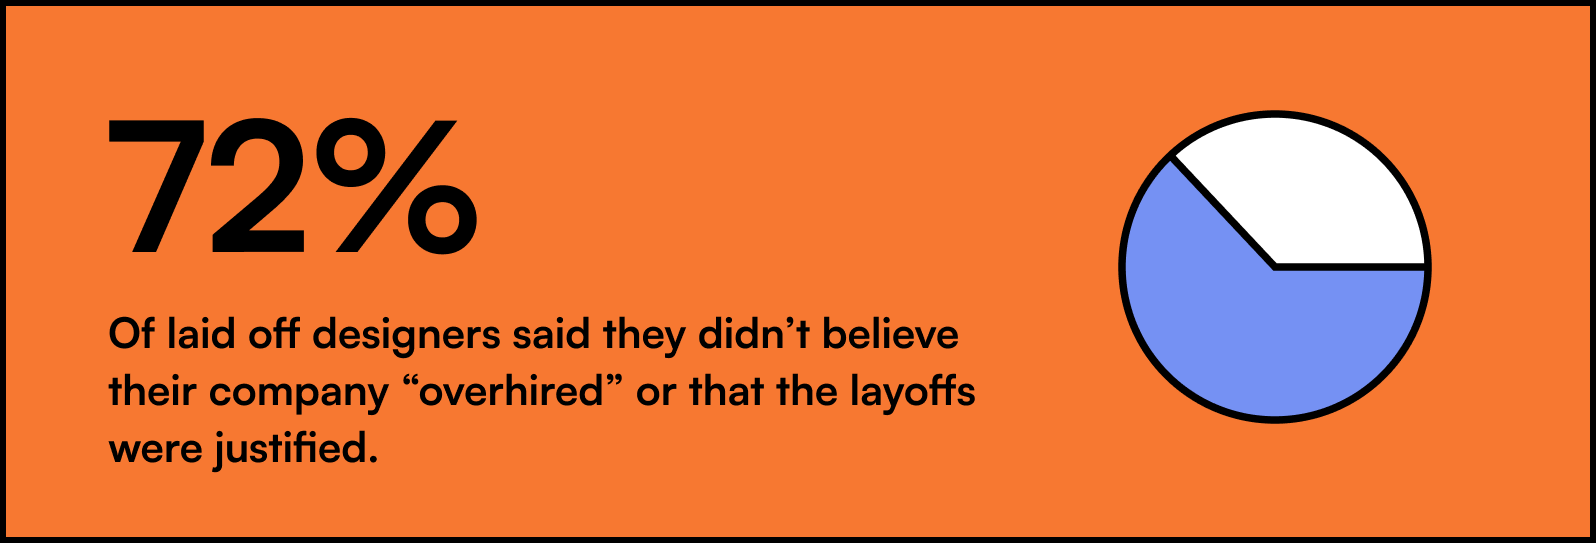 72% of laid-off designers said they didn't believe their company "overhired"